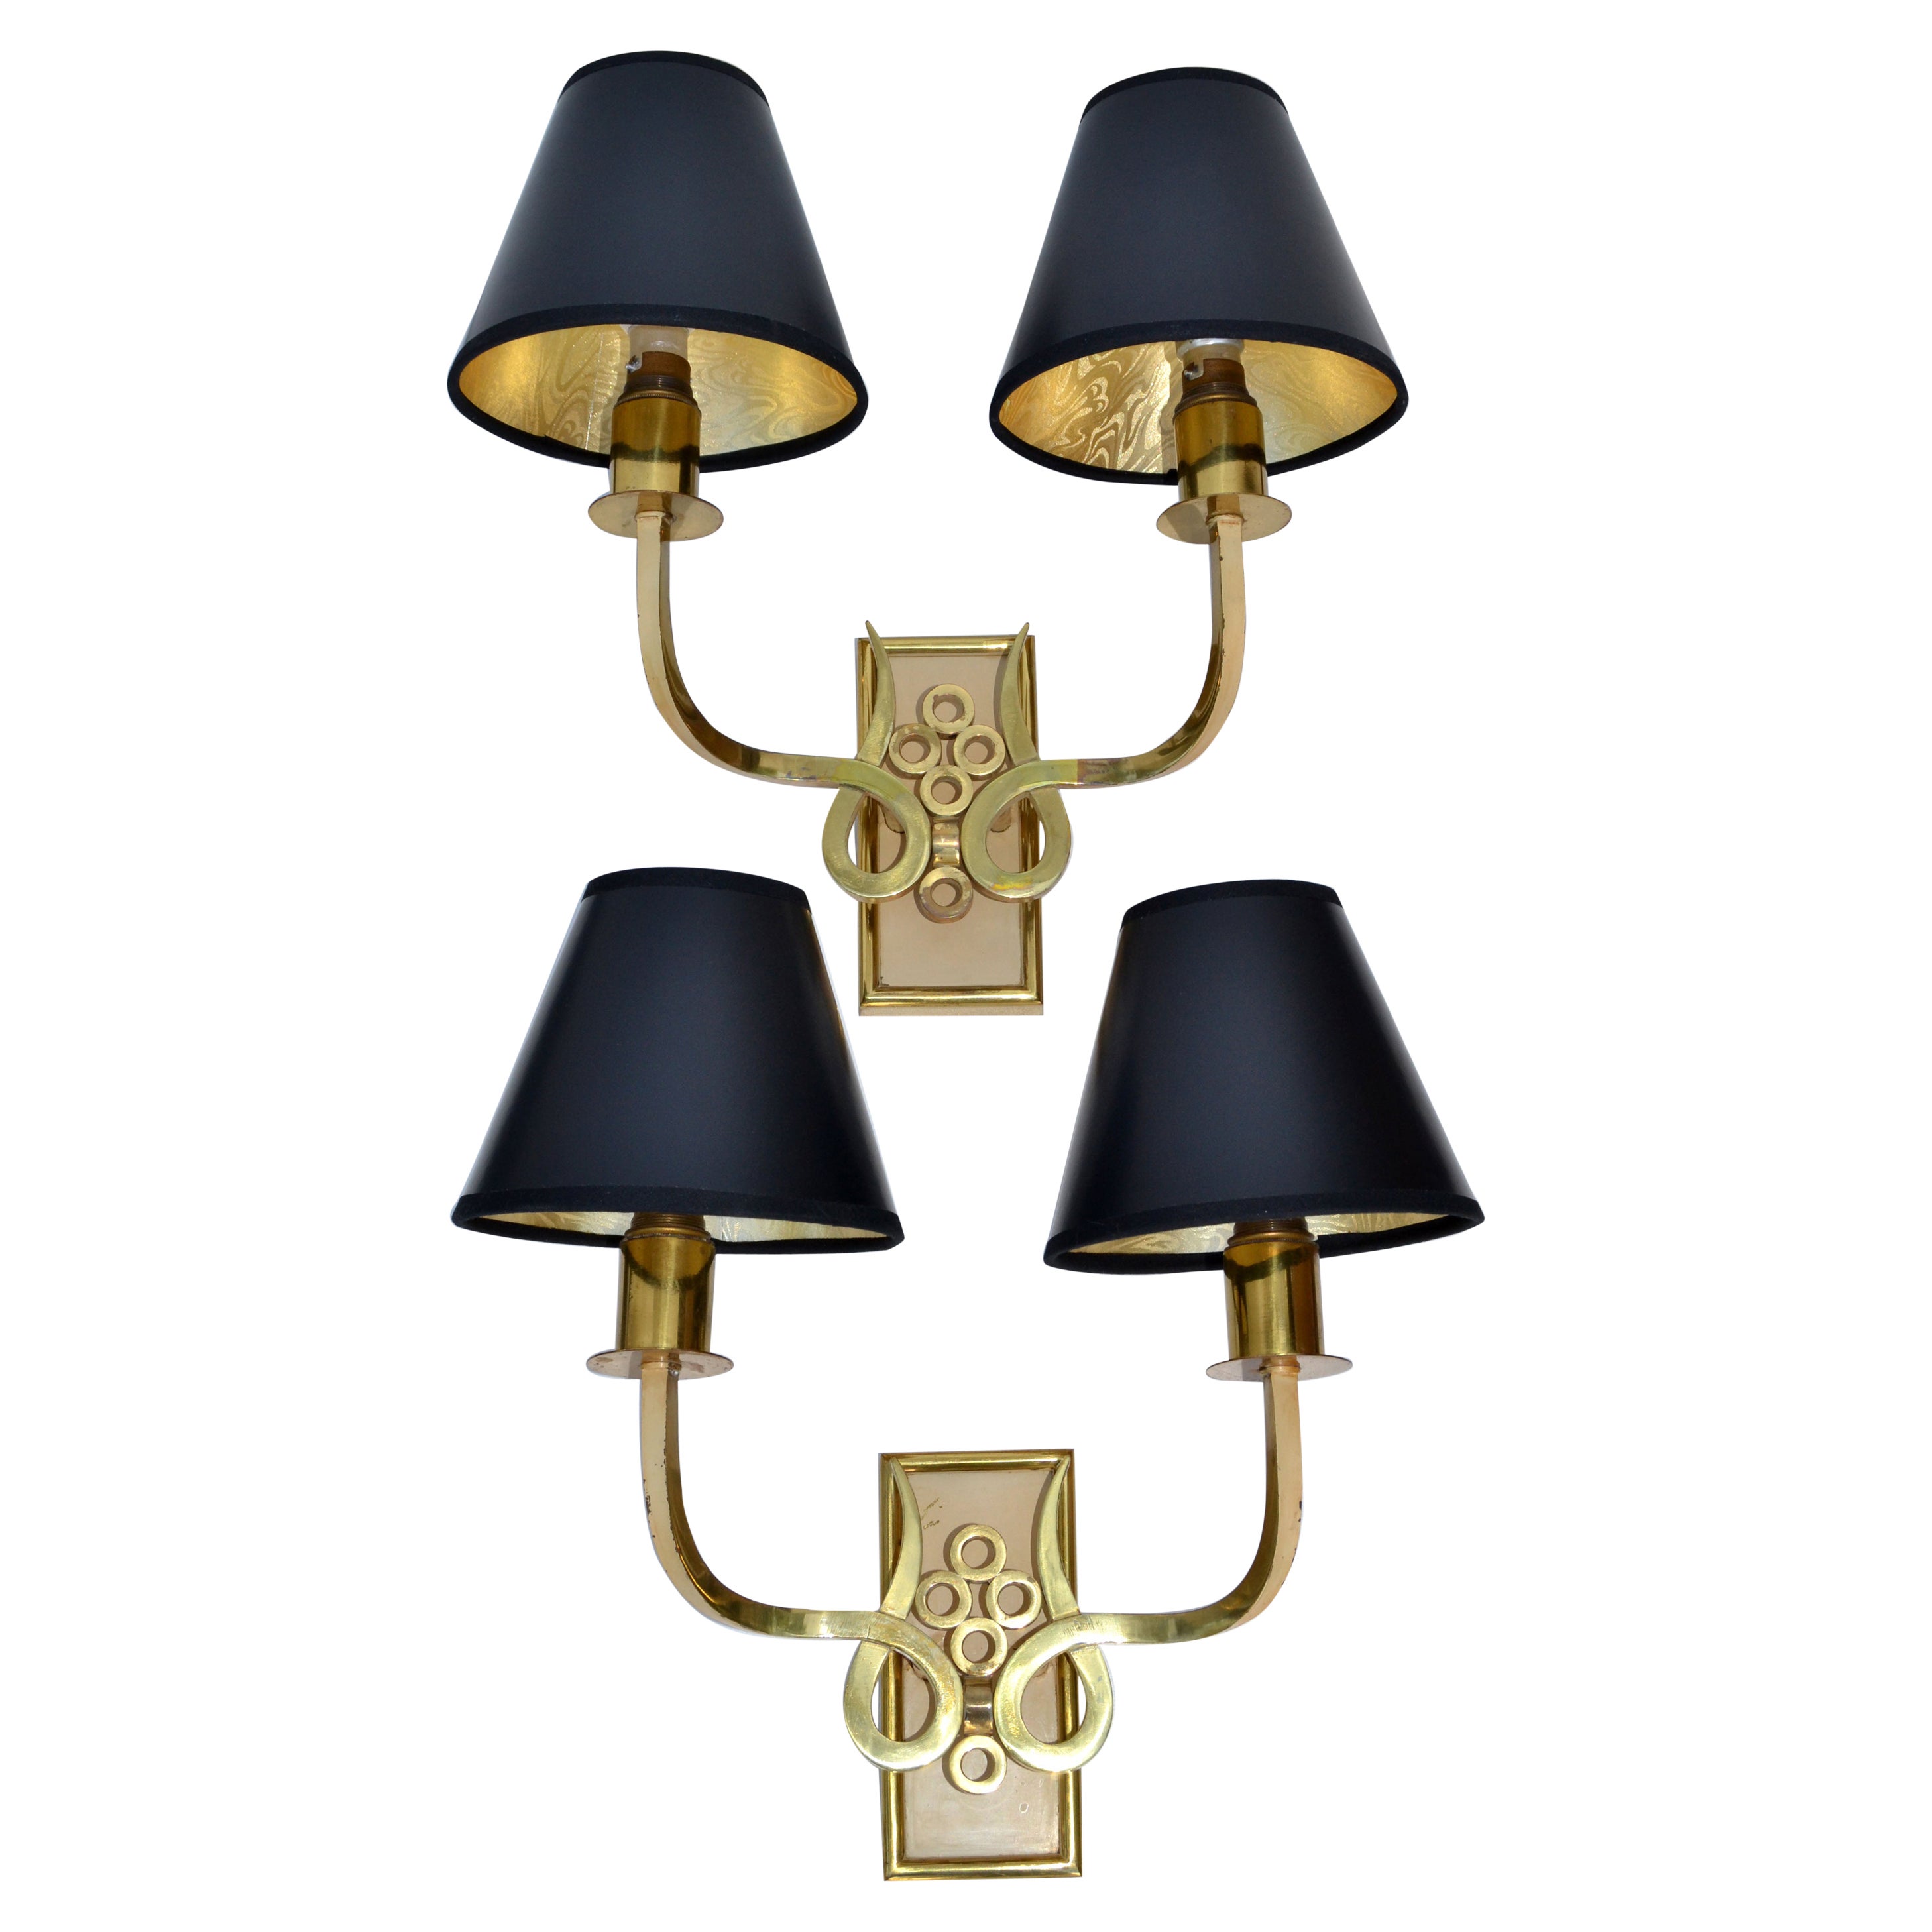 French Bronze & Brass Sconces by Maison Jansen Black & Gold Paper Shade, Pair